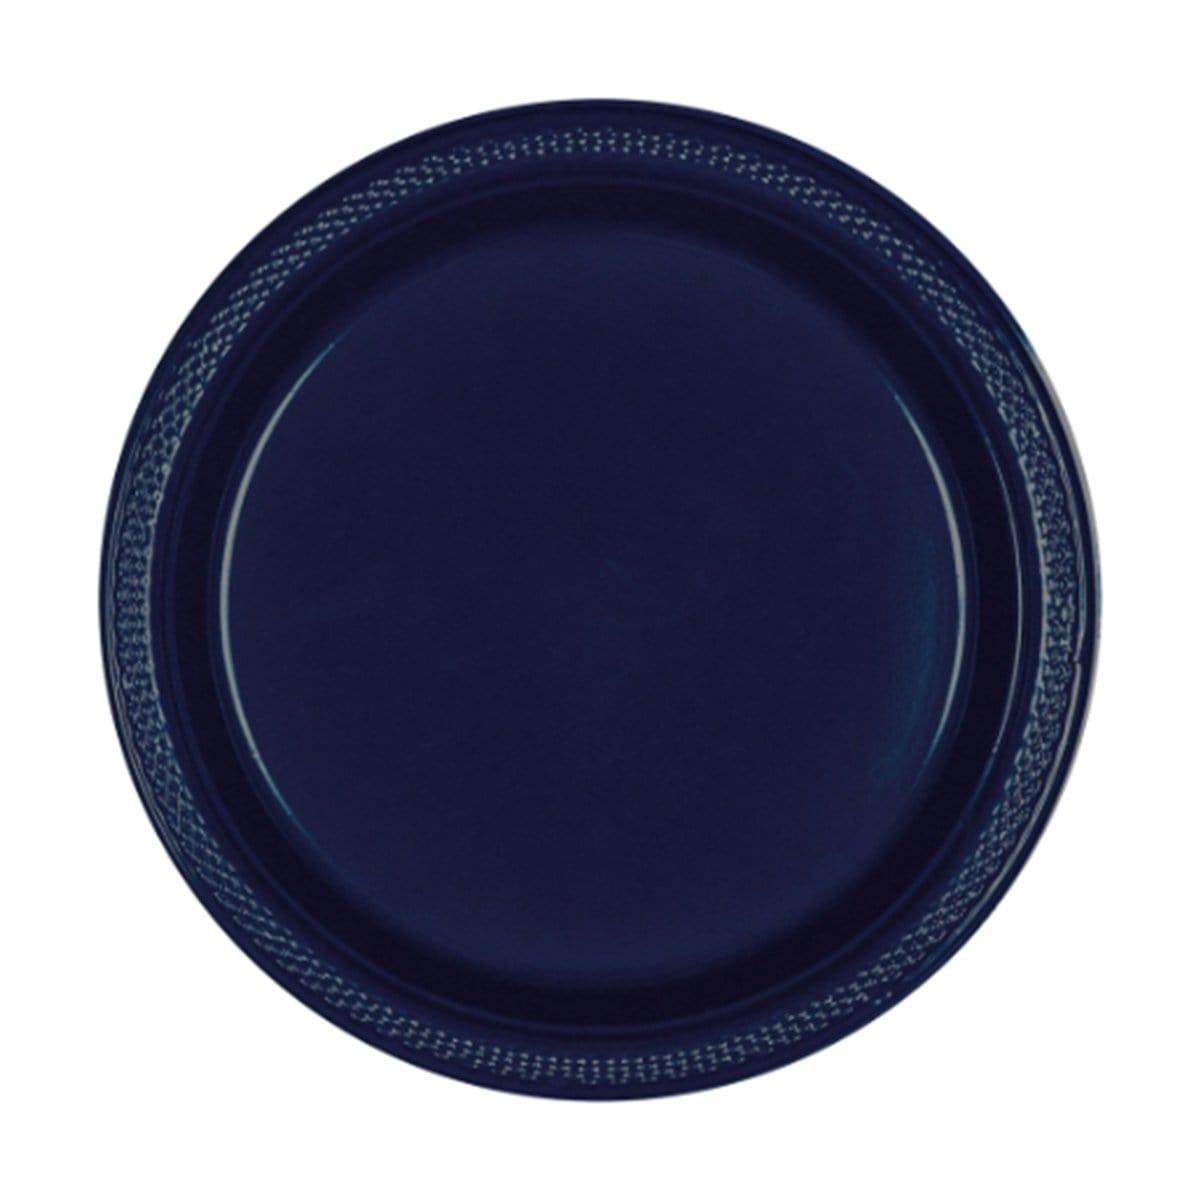 Buy Plasticware Plastic Plates 7 In. - True Navy 20/pkg sold at Party Expert